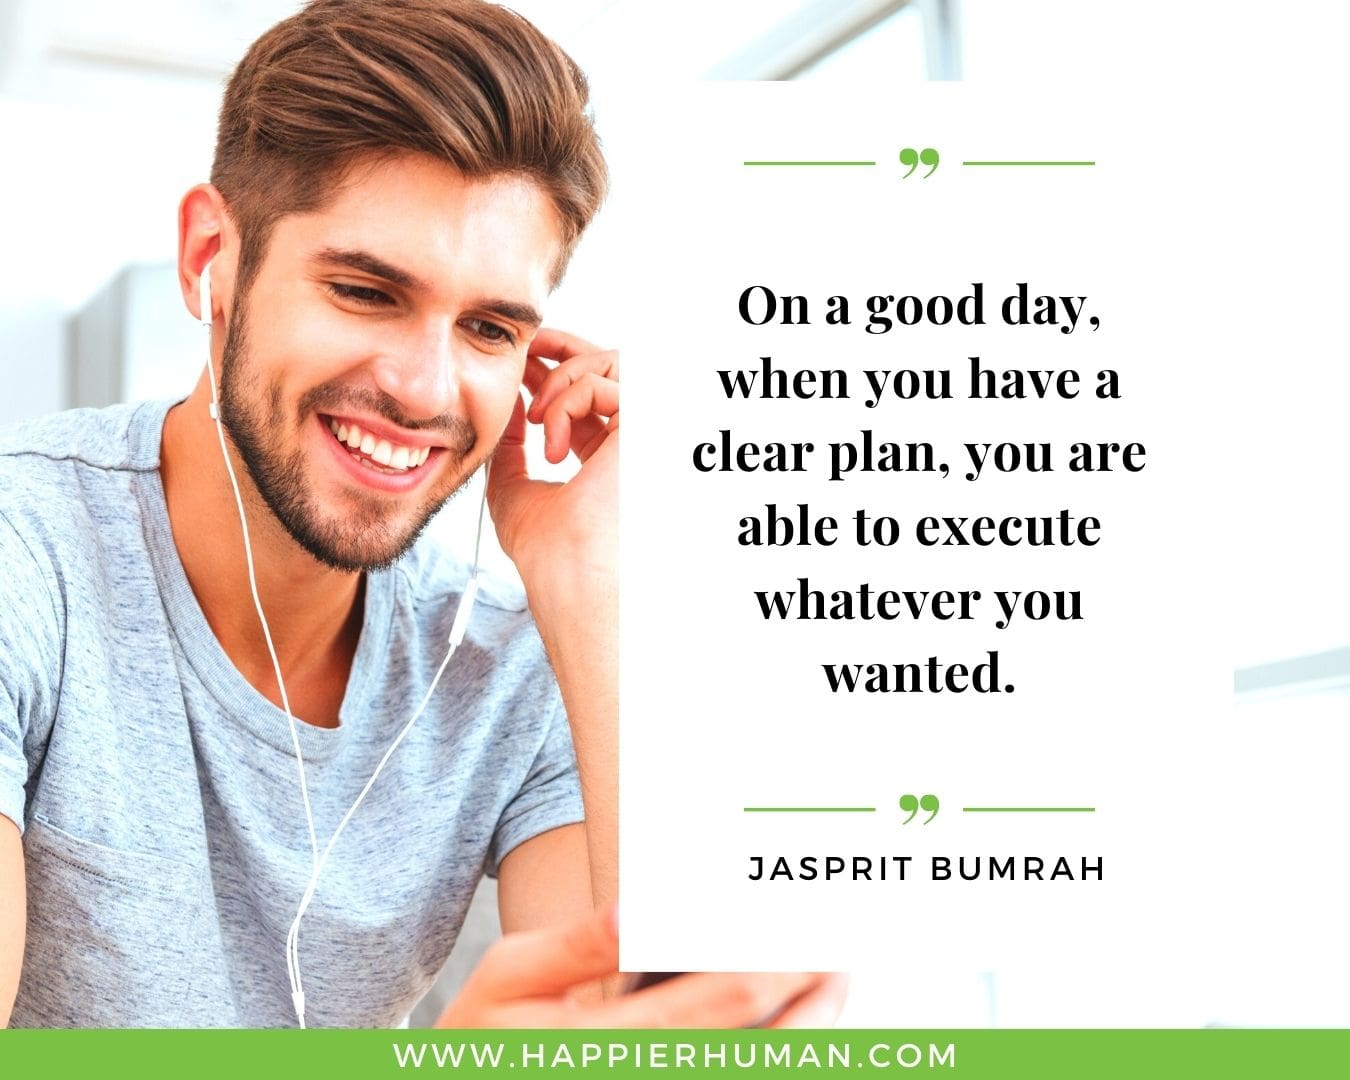 Great Day Quotes - “On a good day, when you have a clear plan, you are able to execute whatever you wanted.” – Jasprit Bumrah